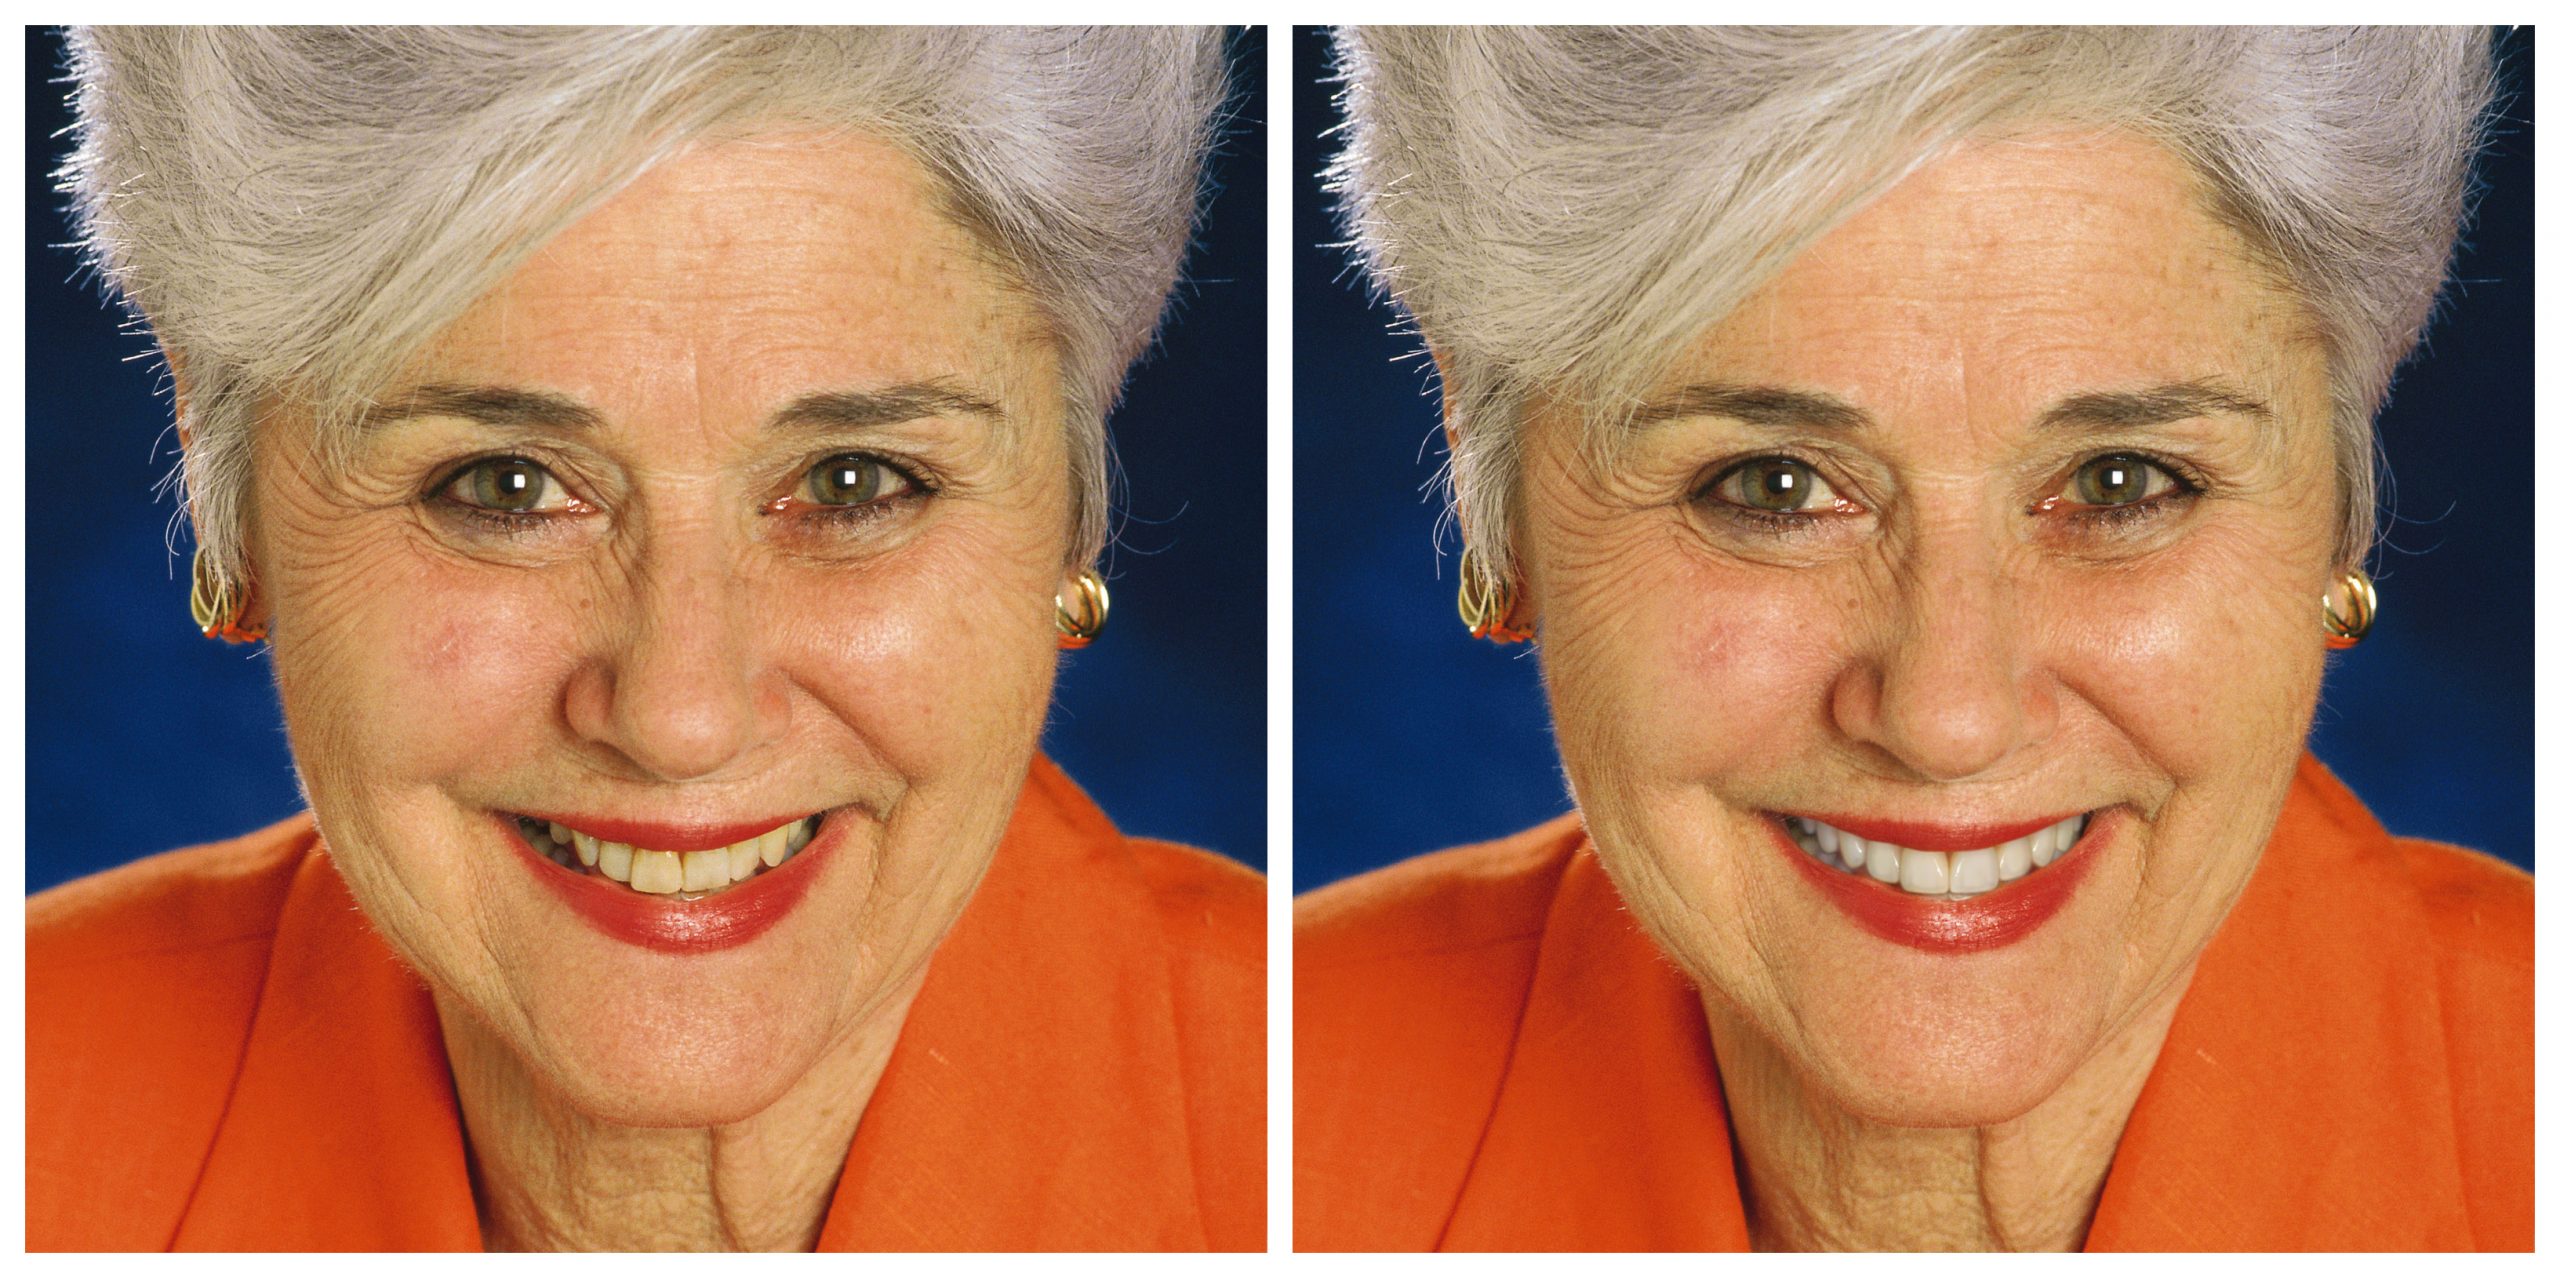 Smile Restoration - Before and After10